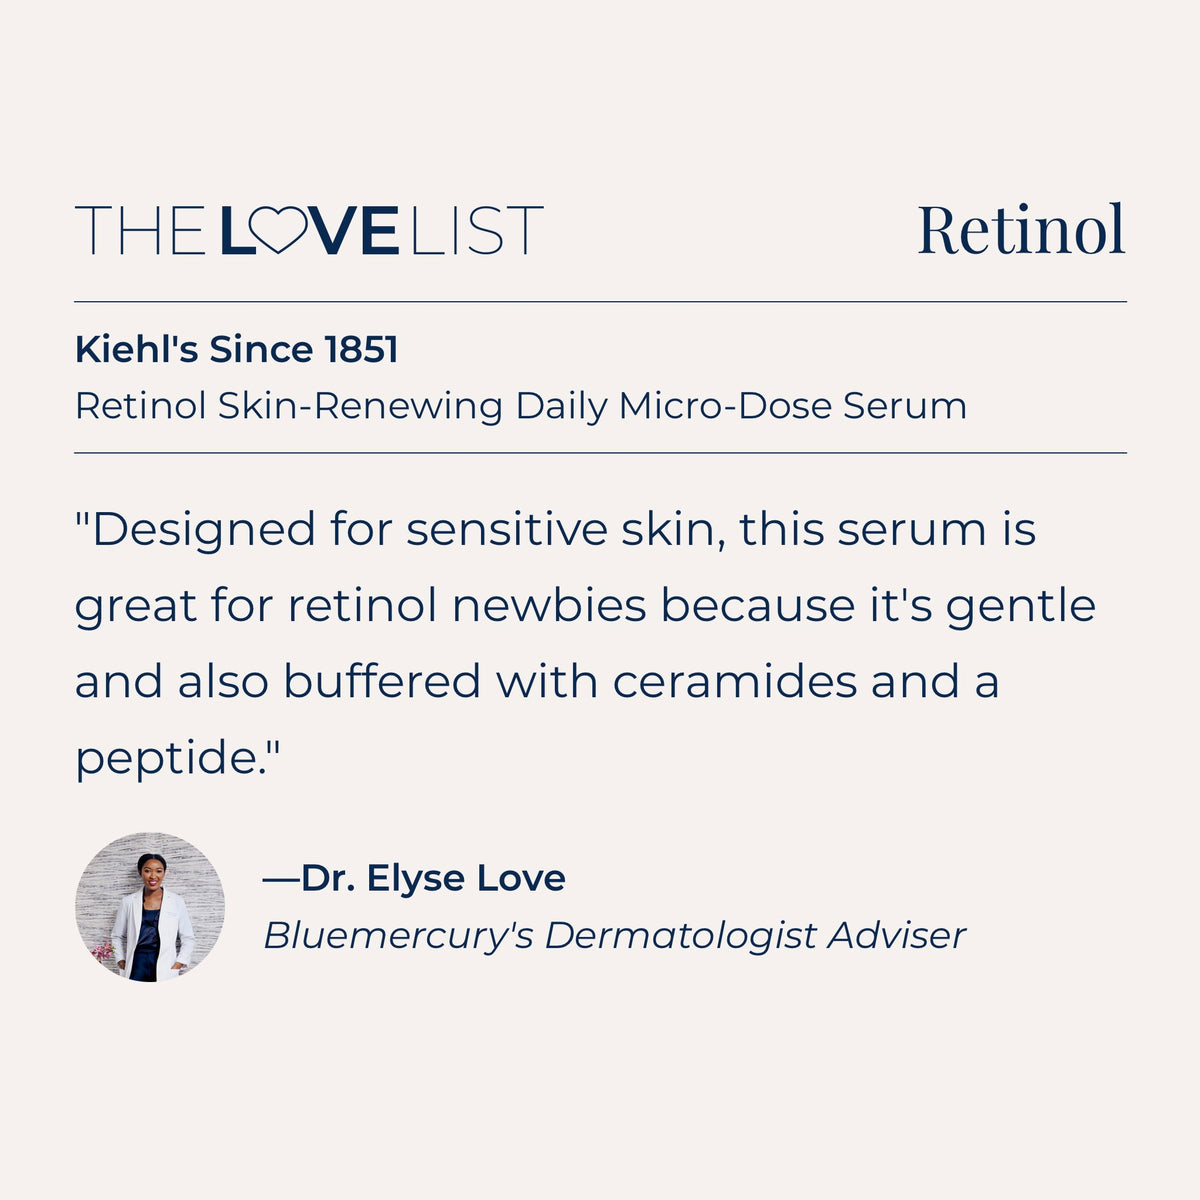 Kiehl's Since 1851 Micro-Dose Anti-Aging Retinol Serum With Ceramides and Peptide .